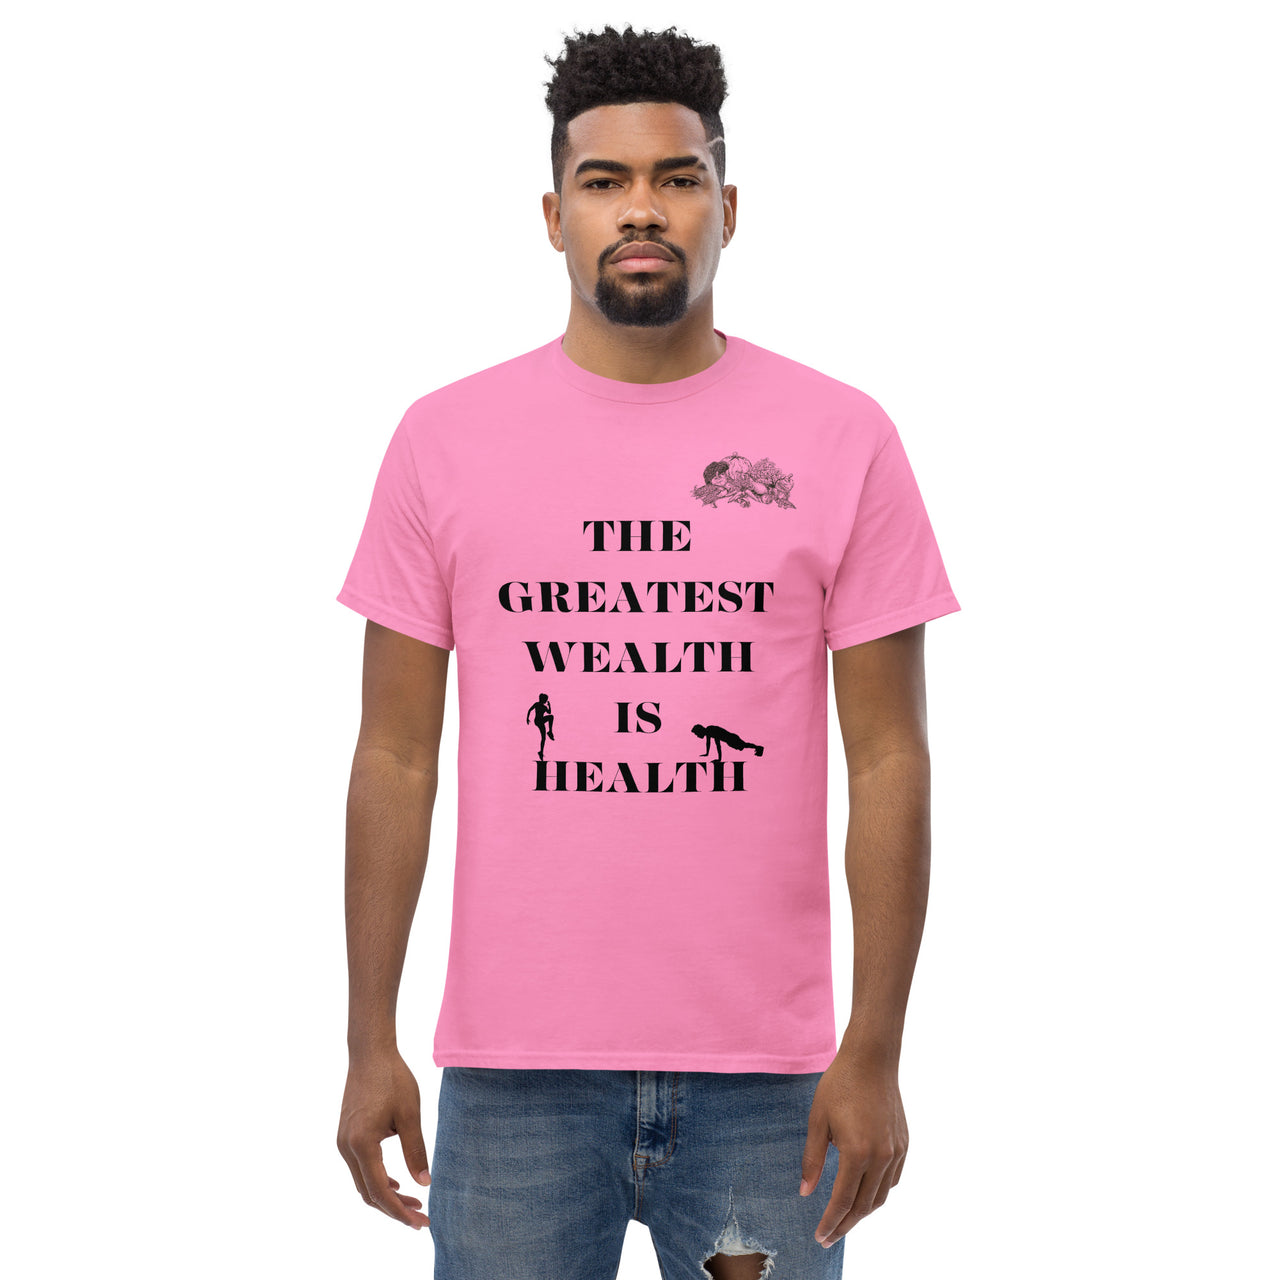 Health Is Wealth Healthy Eating Healthy Lifestyle Vegan Vegetarian Fitness Workout Tshirt